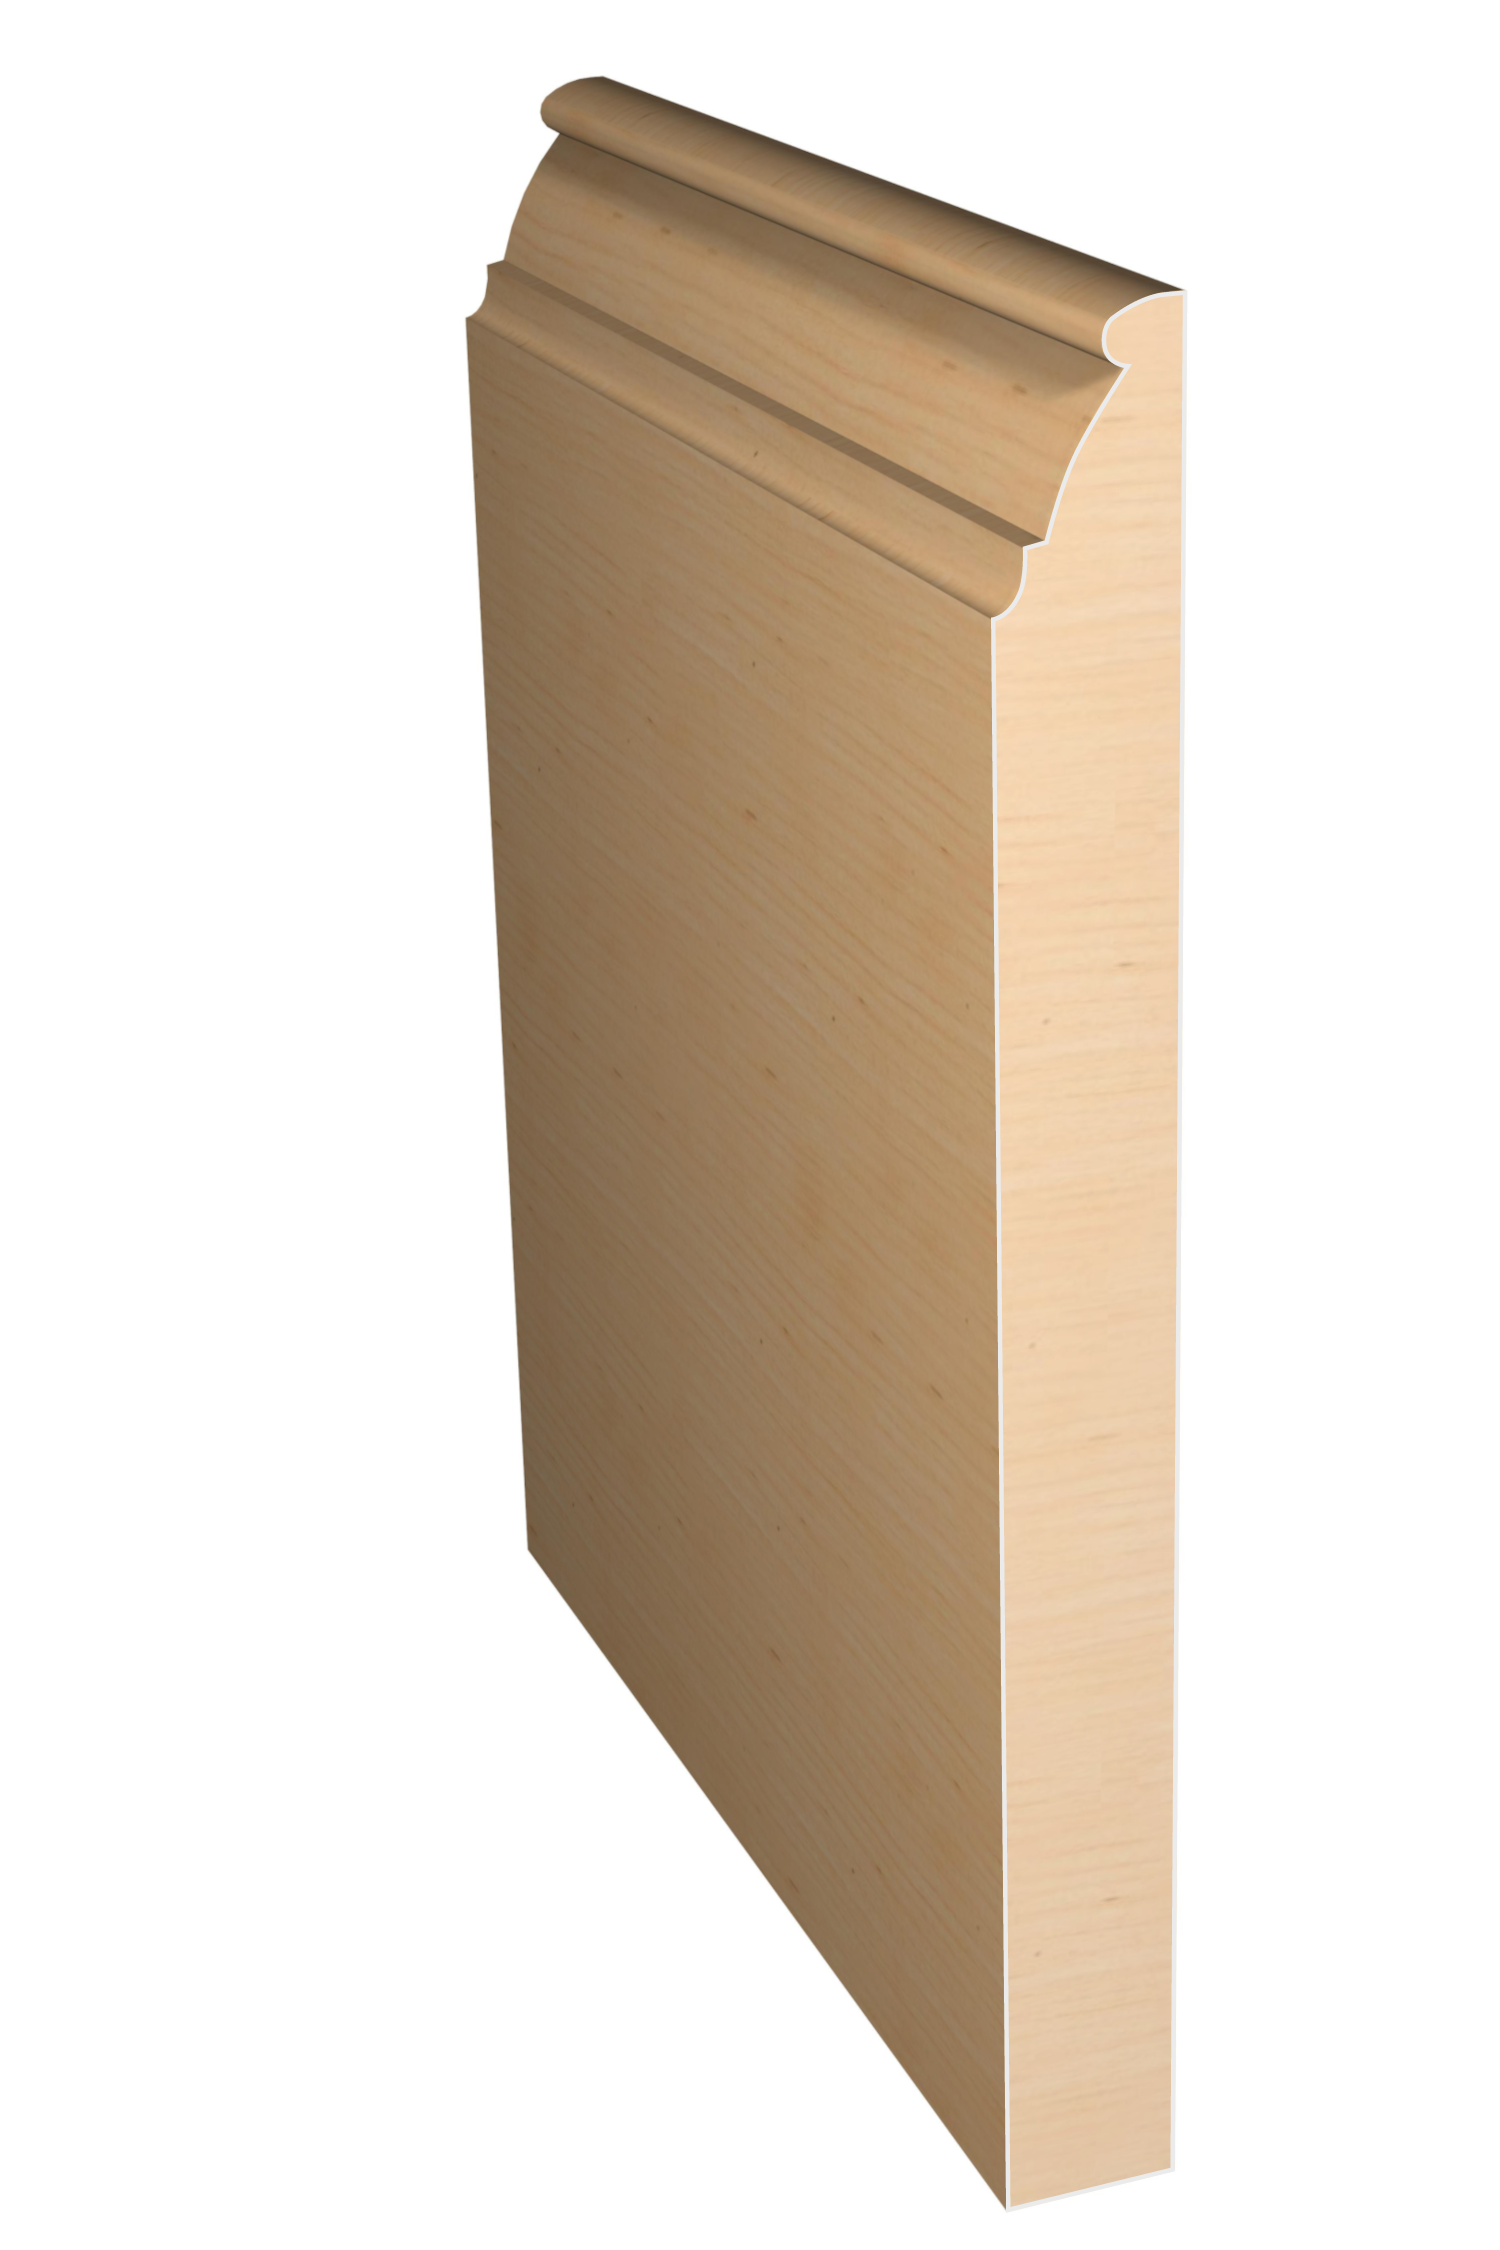 Three dimensional rendering of custom base wood molding BAPL7343 made by Public Lumber Company in Detroit.